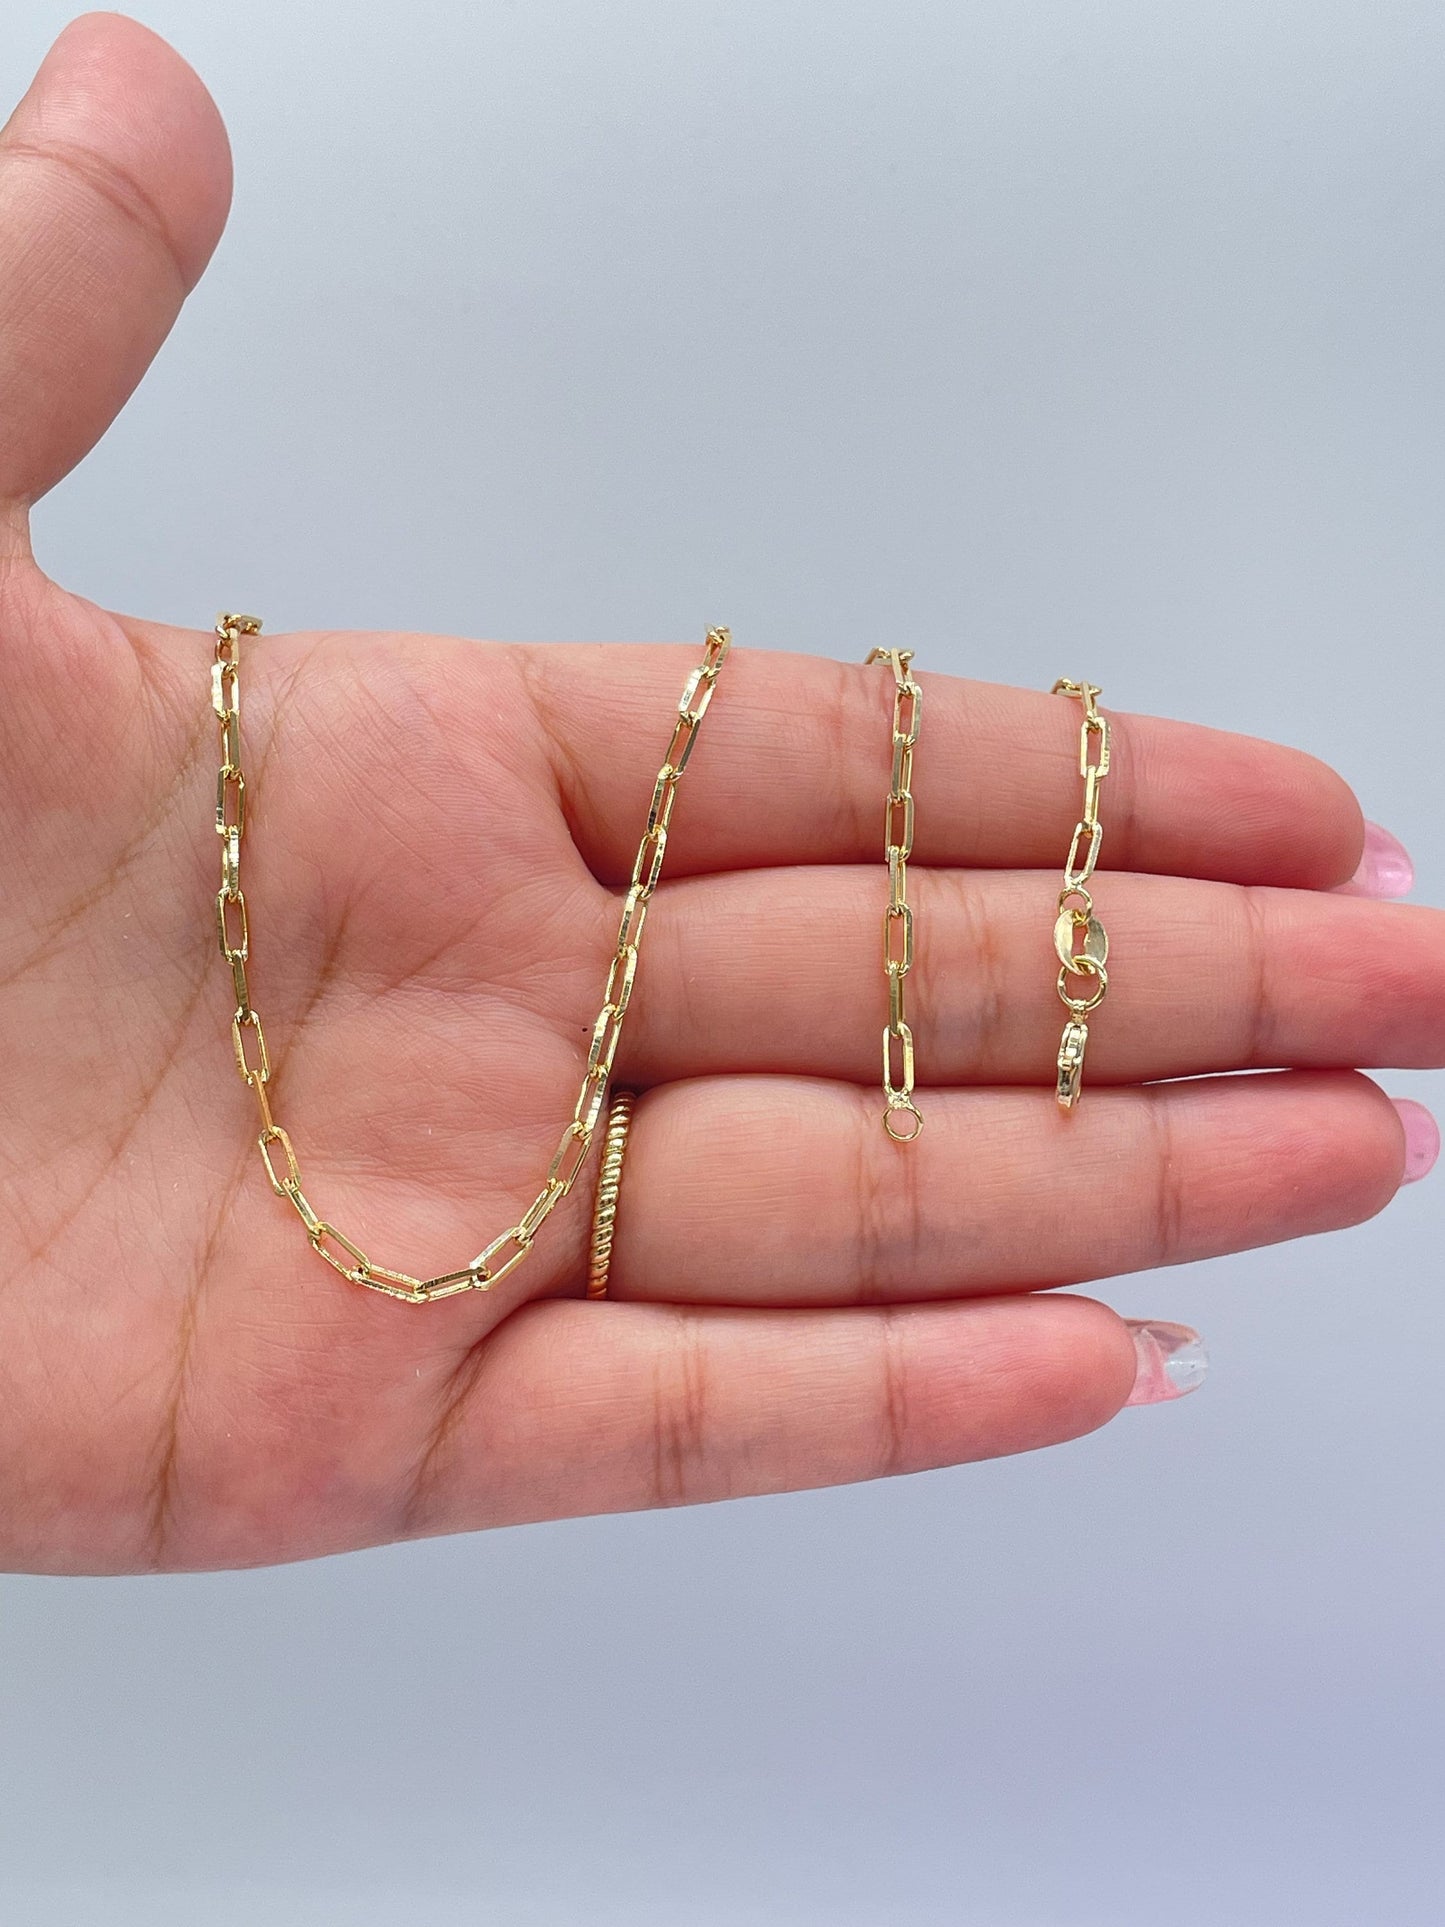 18k Gold Filled 2.5mm Dainty Paper Clip Chain Necklace Dainty Layering Piece, Dainty Jewlery, Simple piece, For Her, Everyday Wear